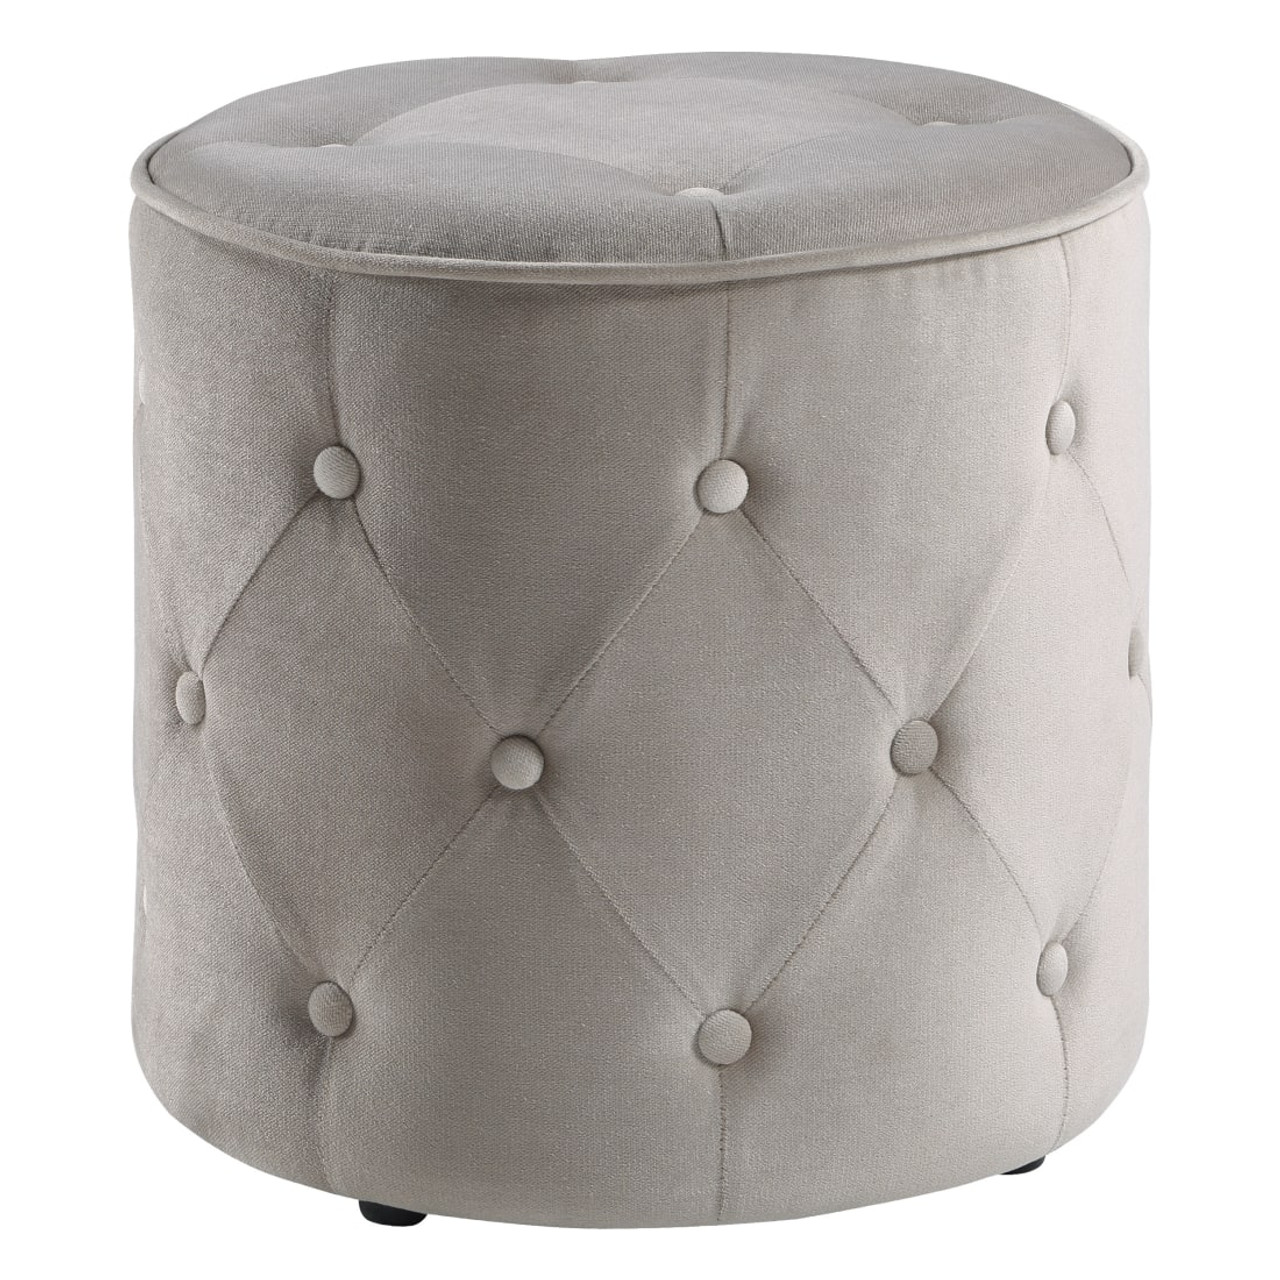 Curves Tufted Round Ottoman in Khaki Fabric